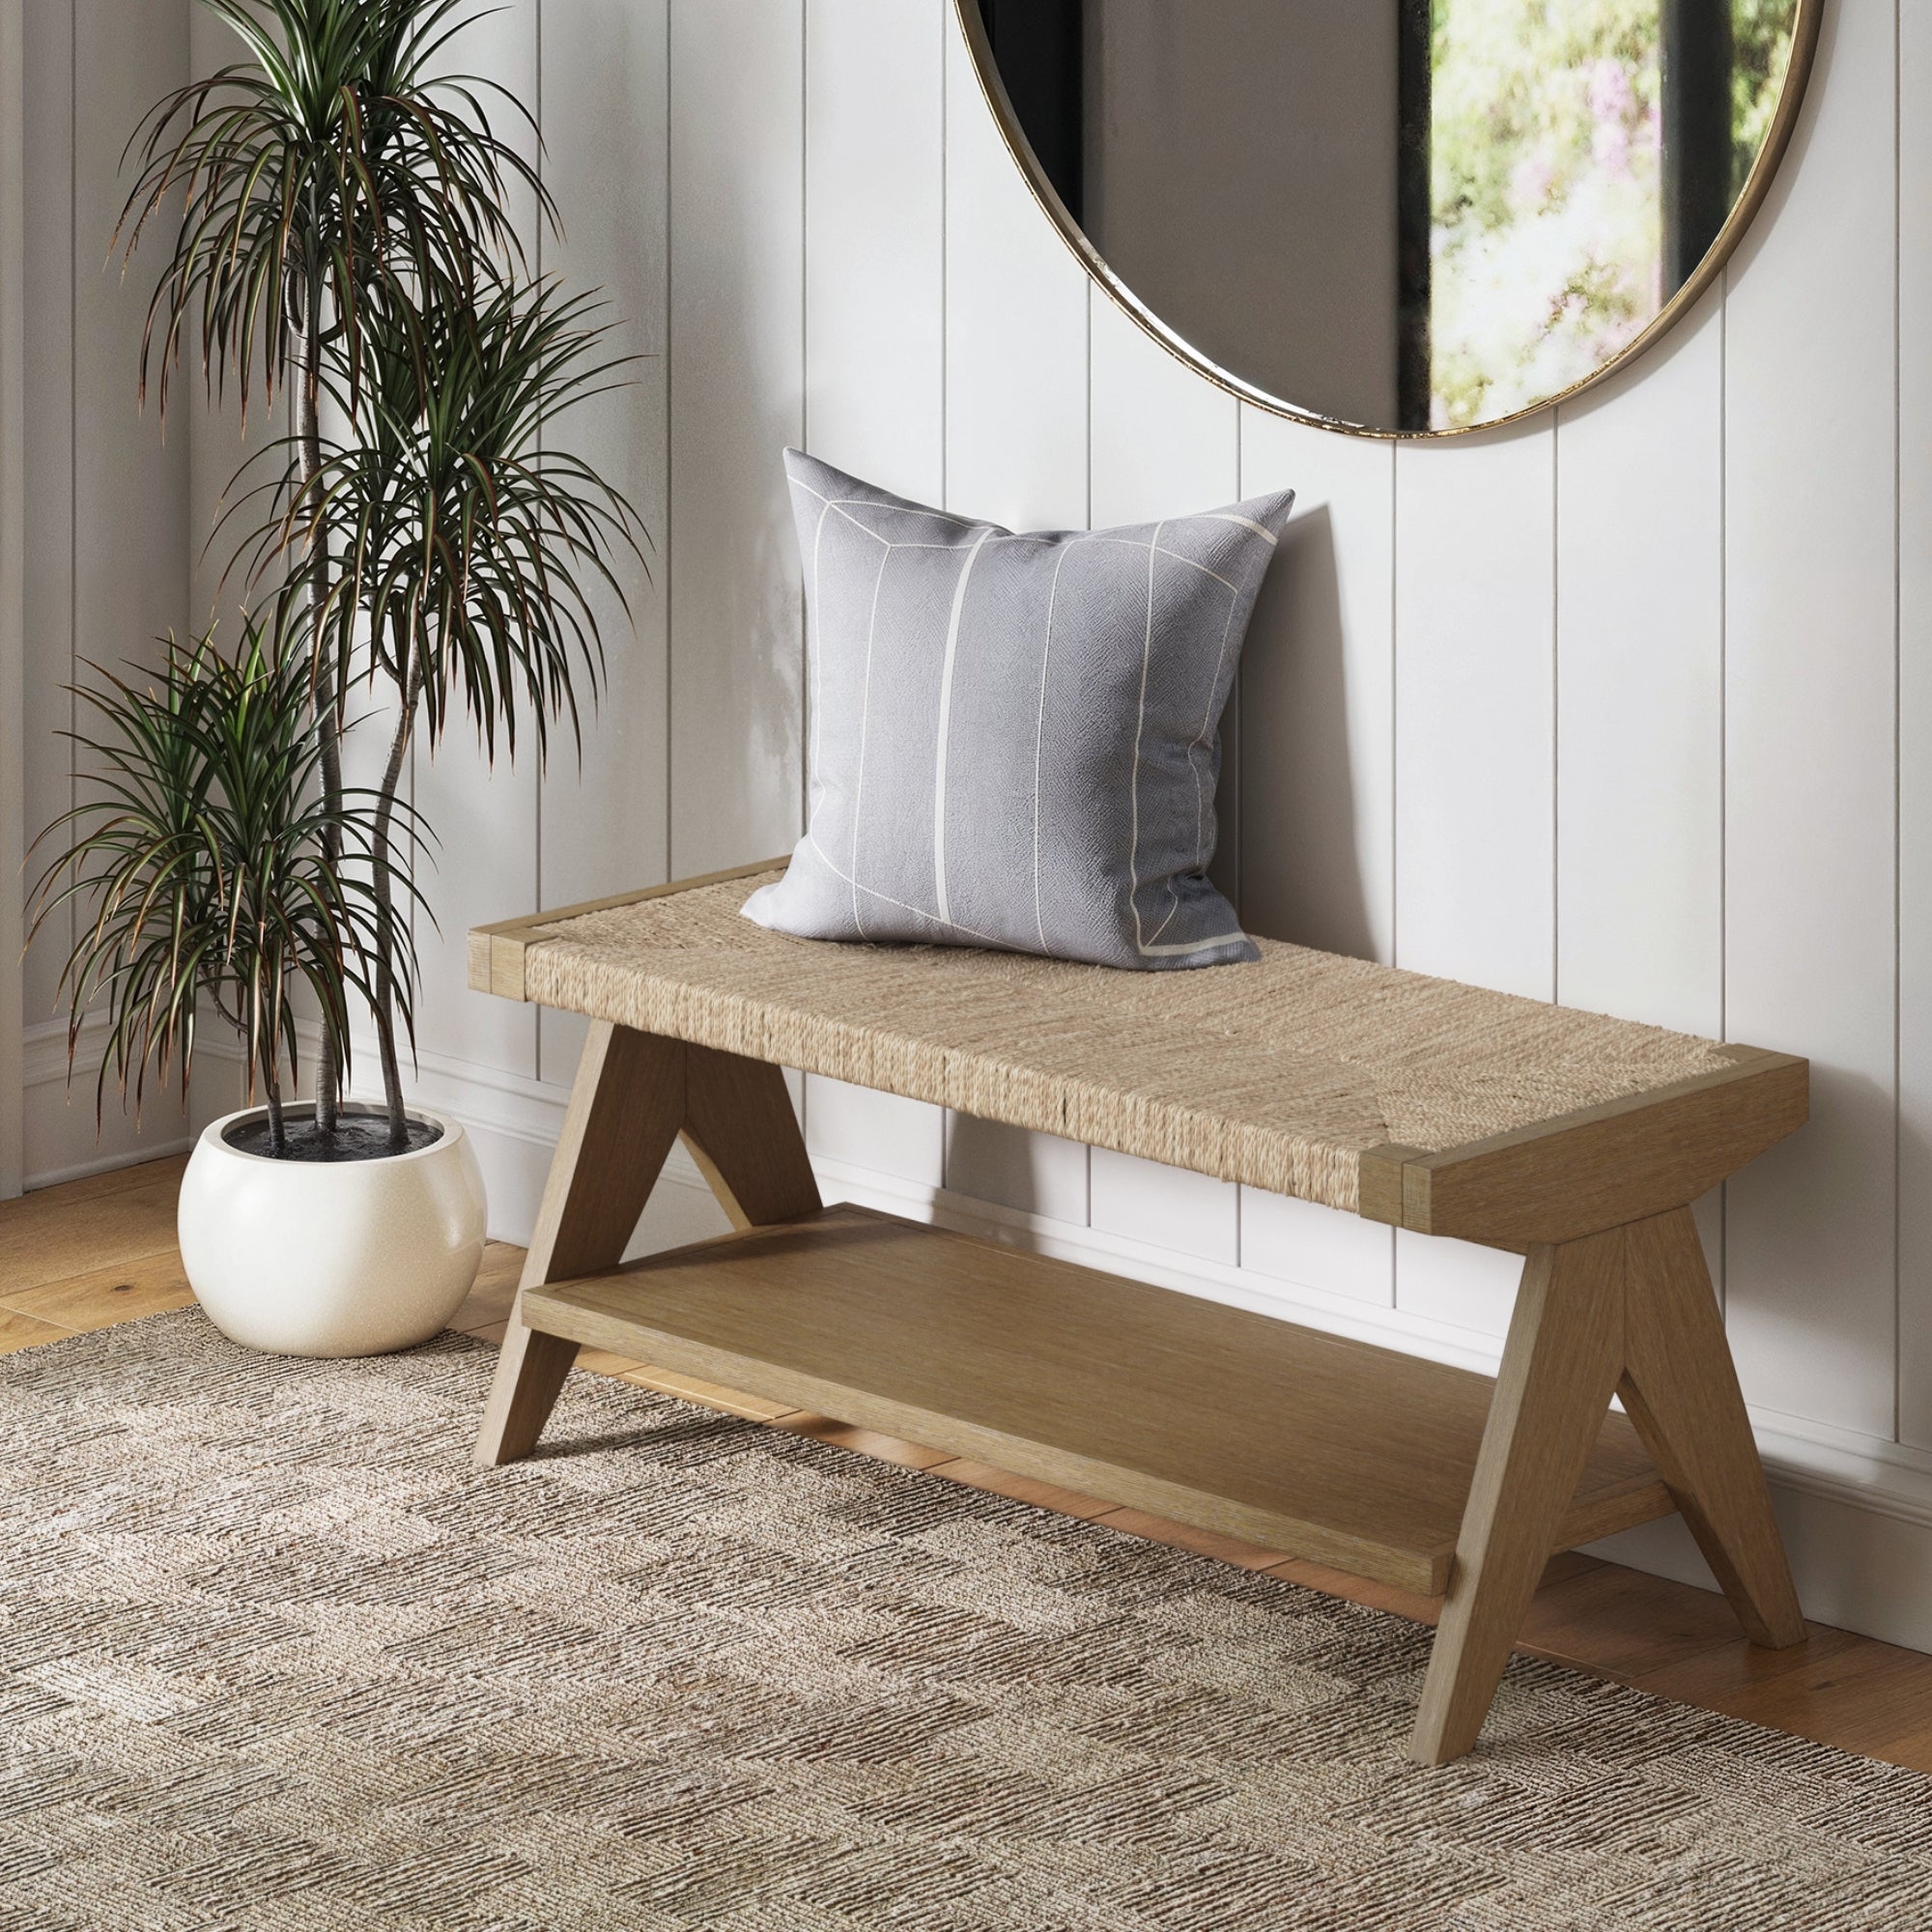 Wood & Seagrass Entryway Bench with Shelf